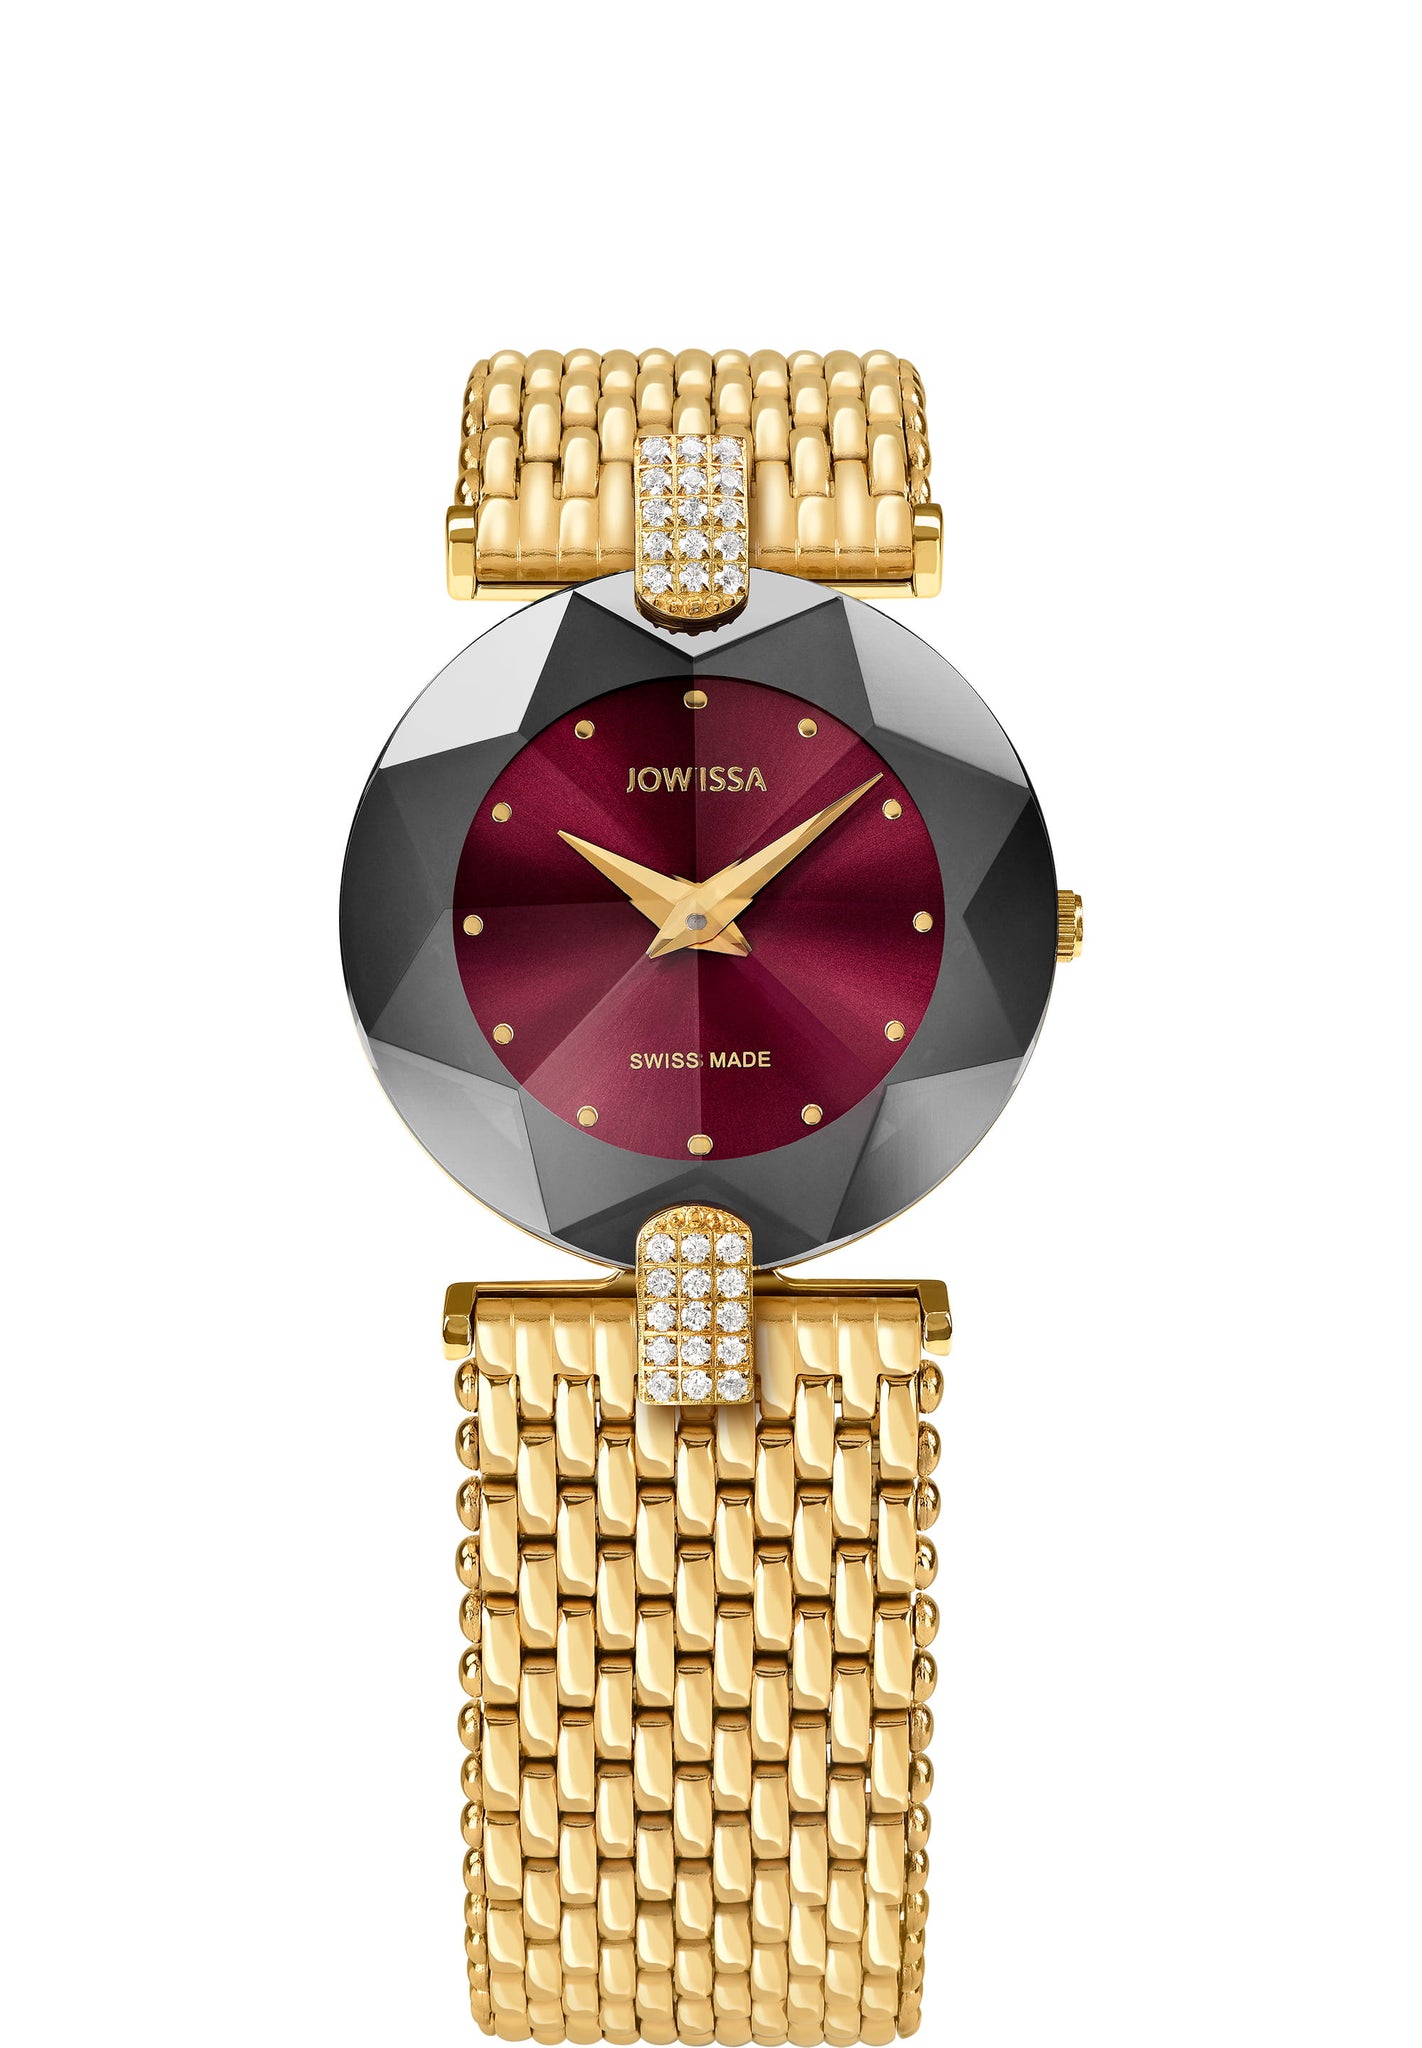 Facet Strass Reloj Mujer Suizo J5.014.M